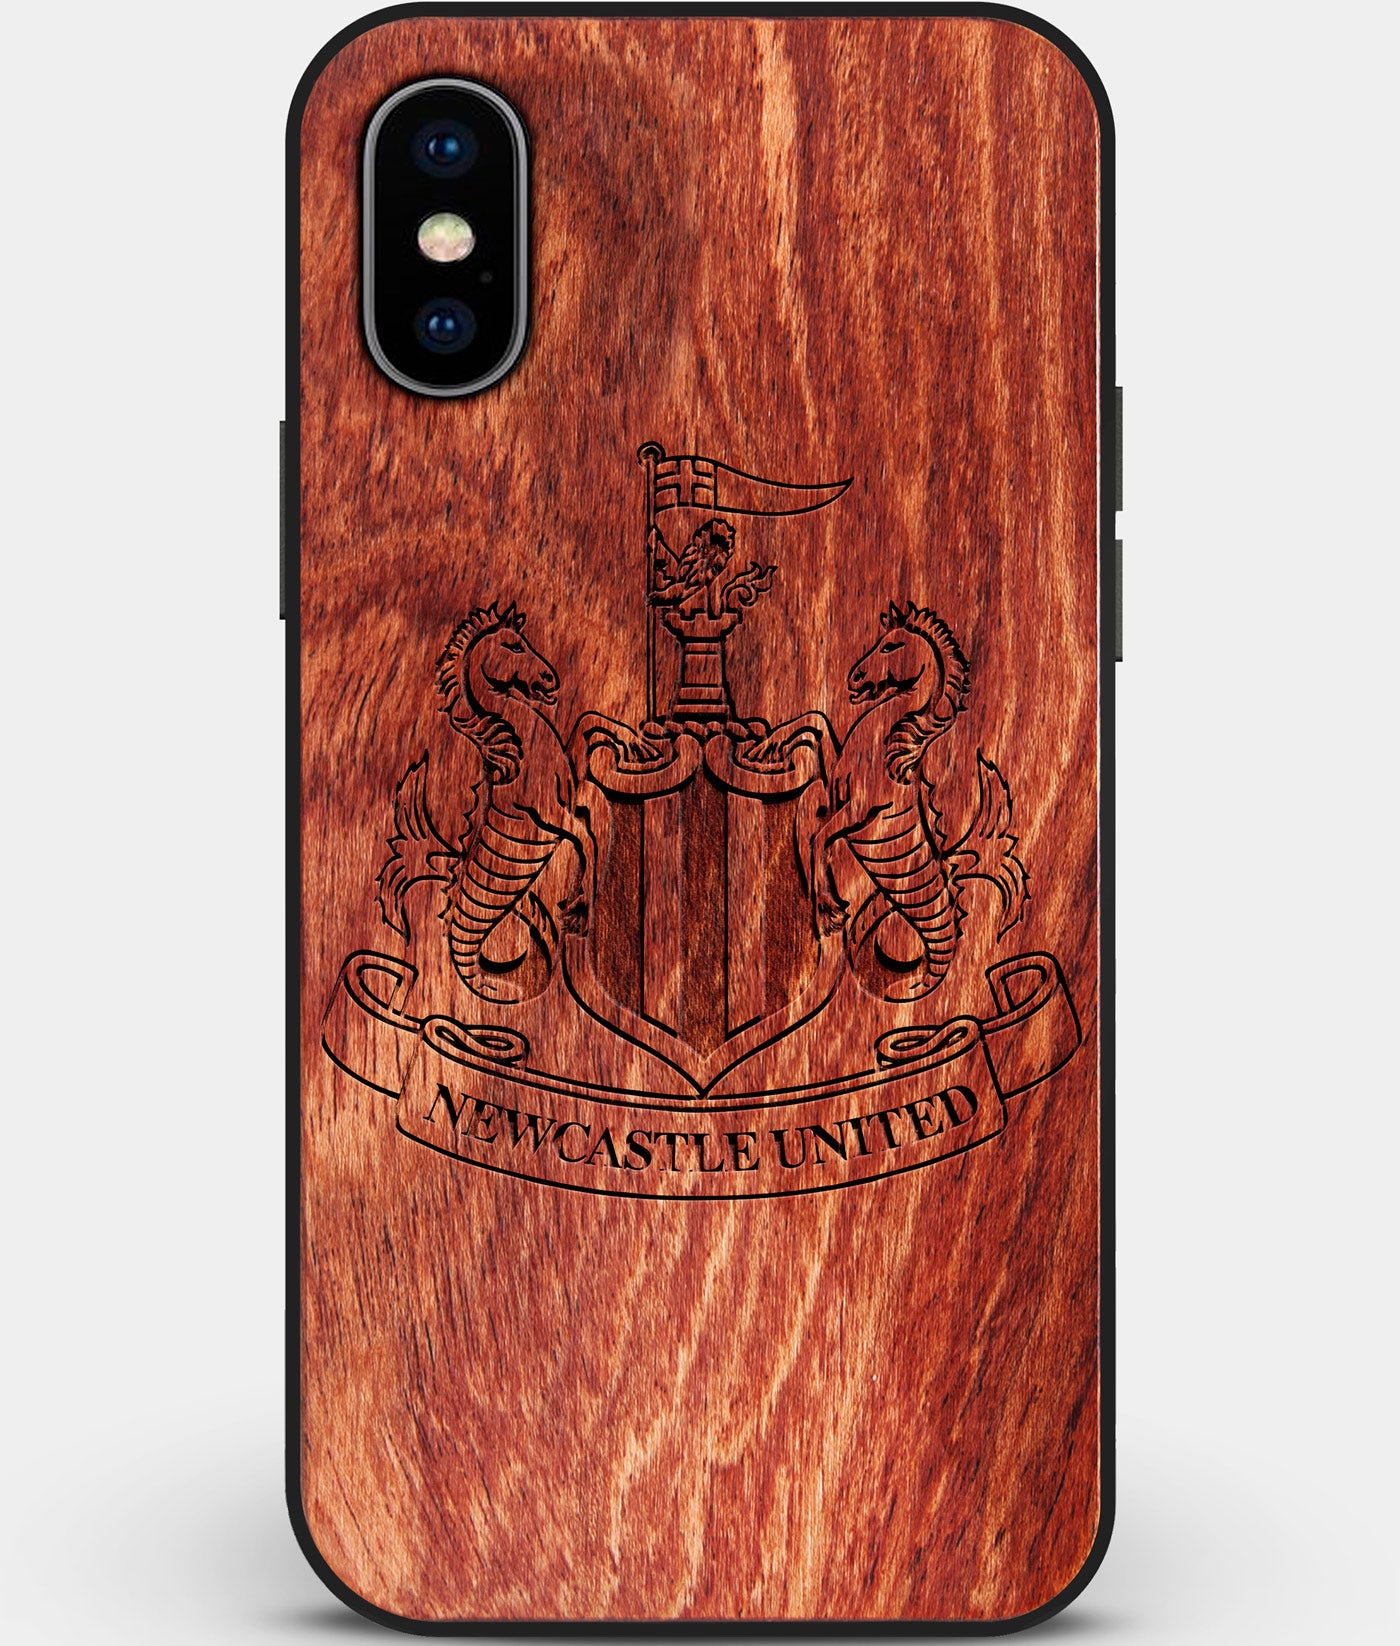 Custom Carved Wood Newcastle United F.C. iPhone X/XS Case | Personalized Mahogany Wood Newcastle United F.C. Cover, Birthday Gift, Gifts For Him, Monogrammed Gift For Fan | by Engraved In Nature